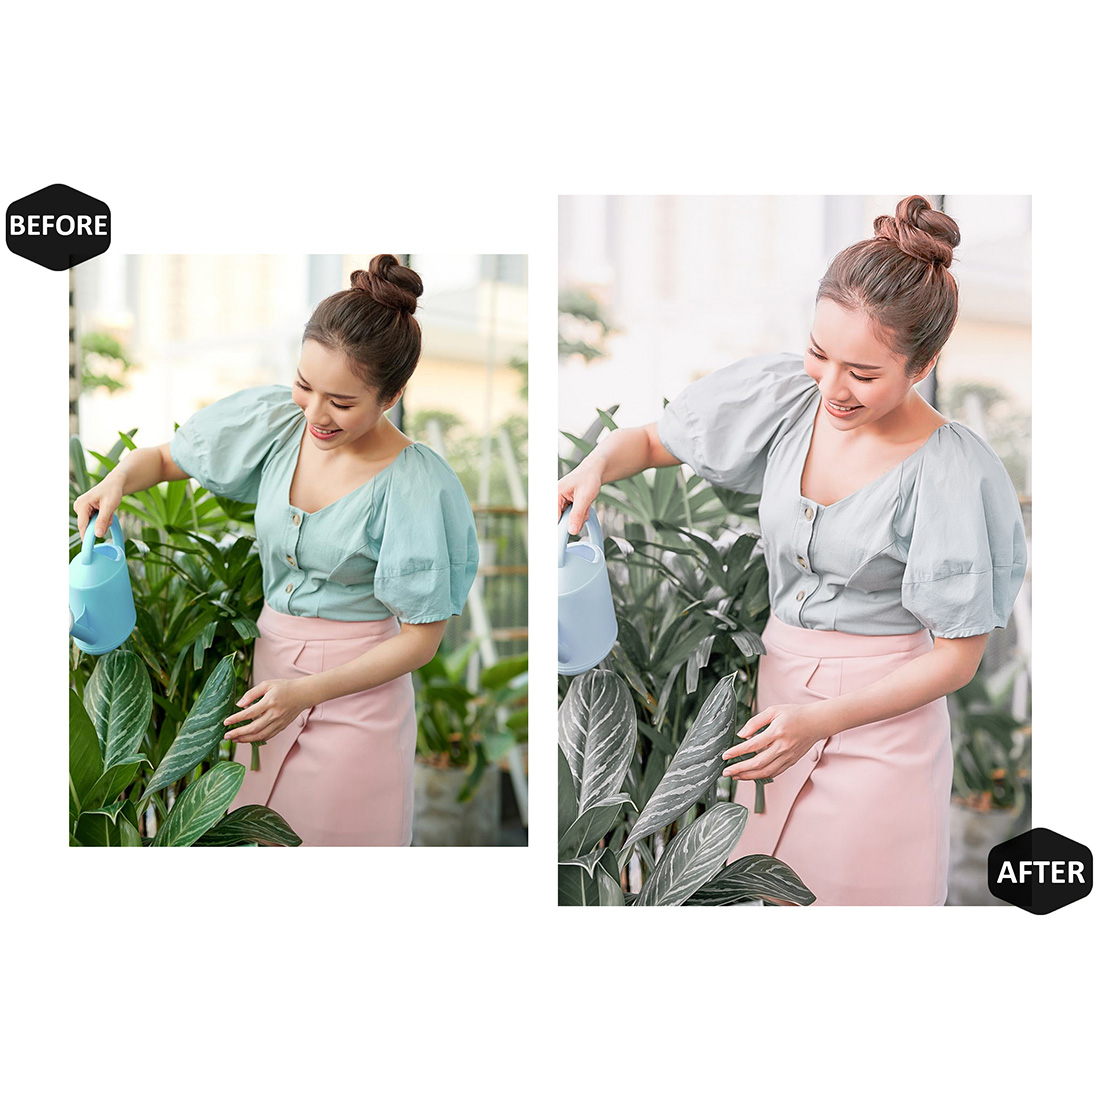 12 Photoshop Actions, Pastel Colors Ps Action, Bright ACR Preset, Spring Girl Ps Filter, Atn Portrait And Lifestyle Theme For Instagram, Blogger preview image.